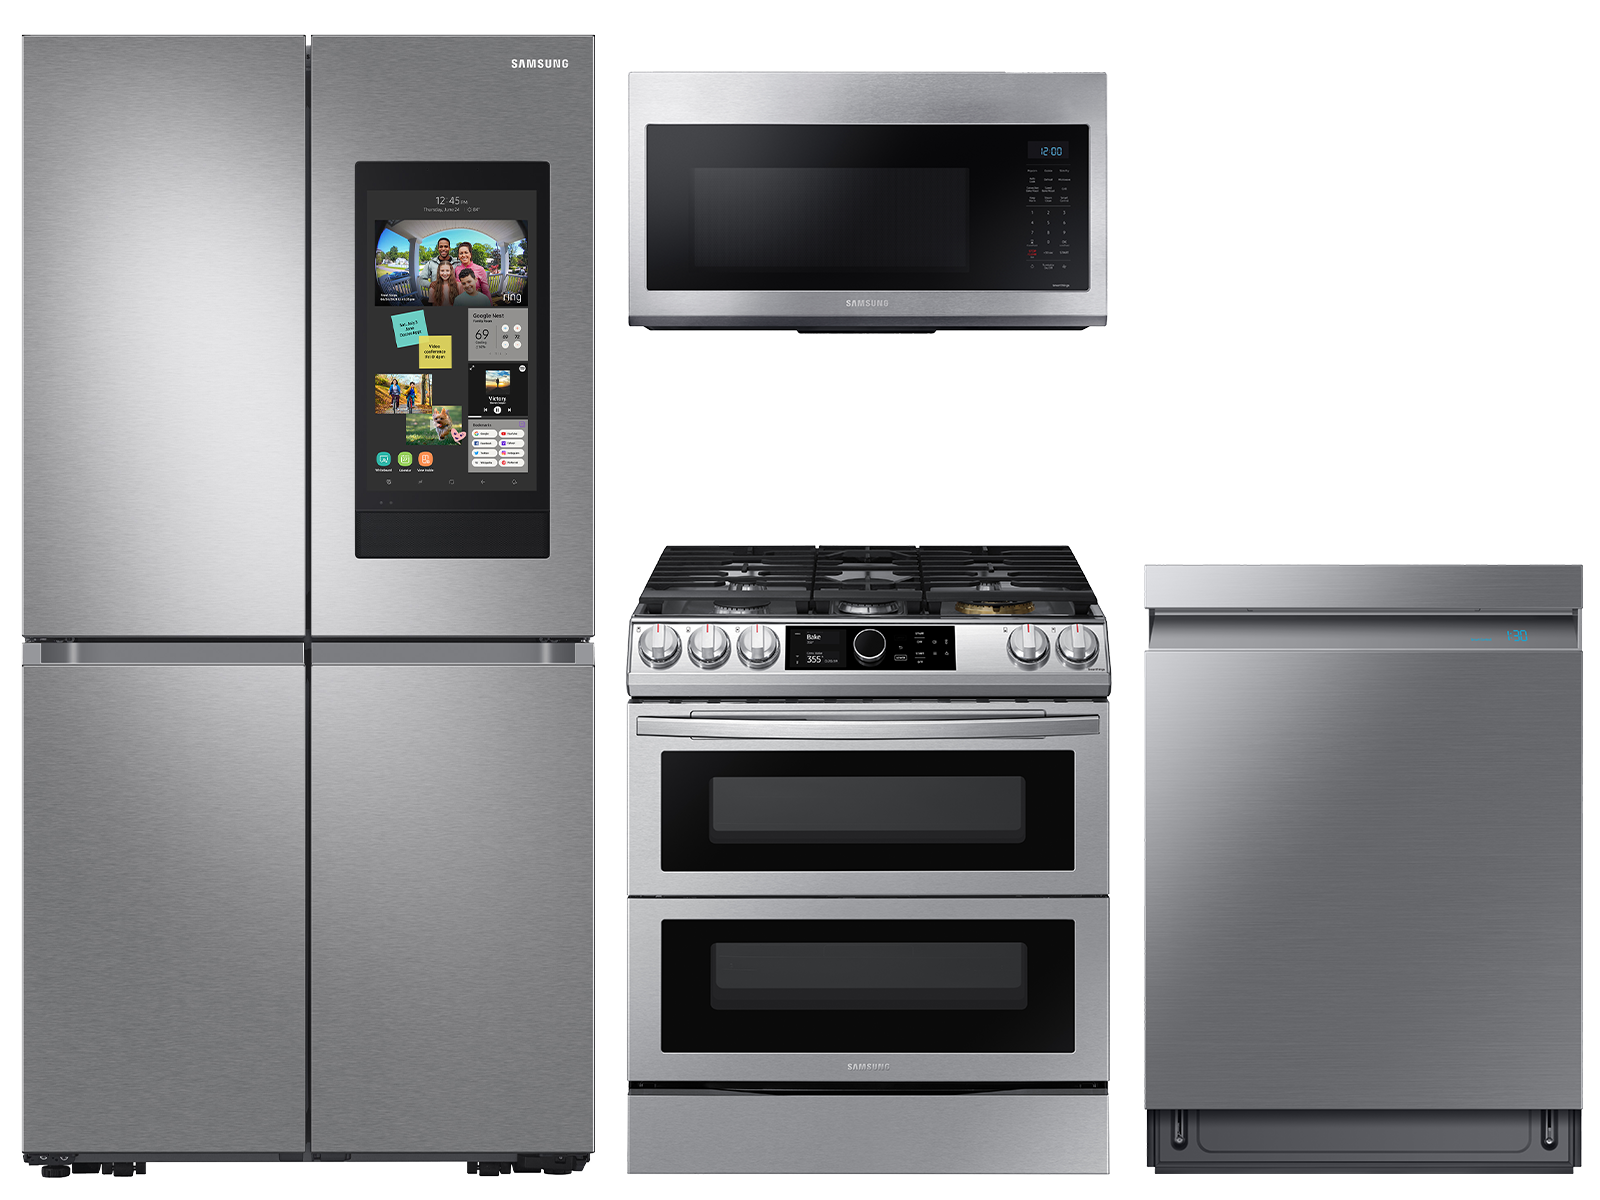 Samsung 23 cu. ft. Family Hub™ 4-Door refrigerator, gas range, convection microwave and Smart Linear dishwasher package(BNDL-1623883733757)